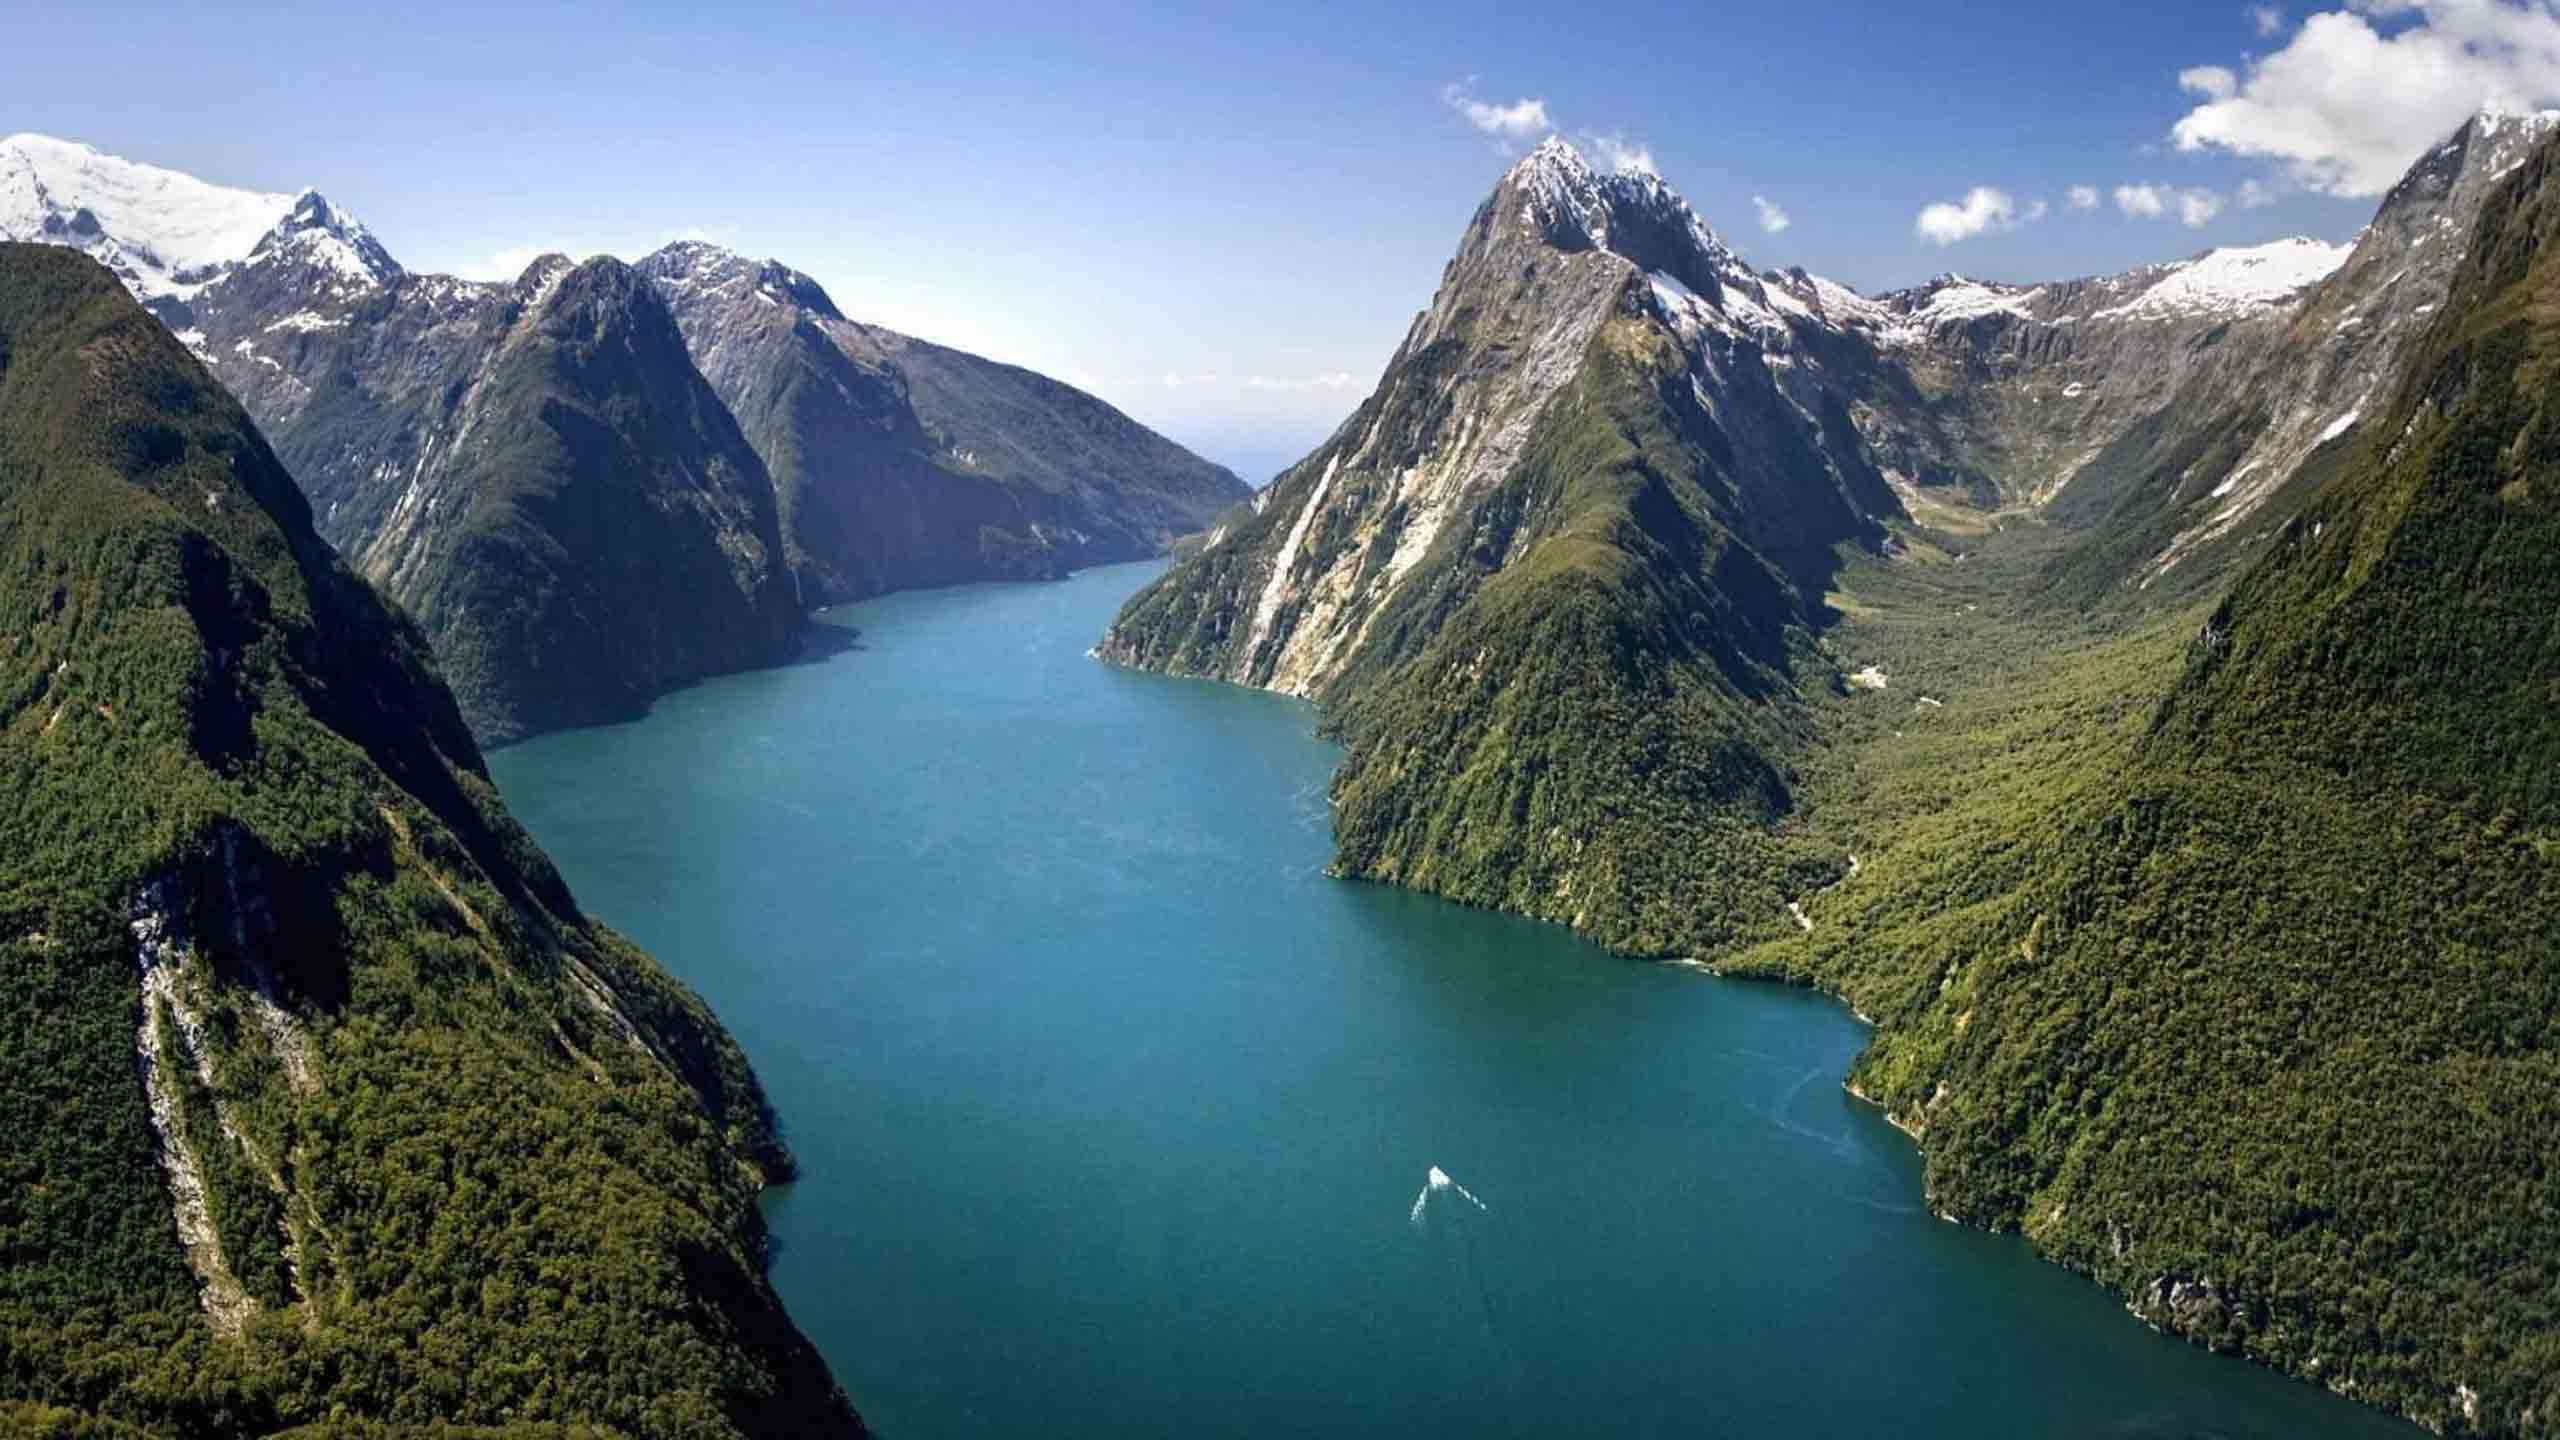 Just Milford - Milford Track Walk & Milford Sound Overnight Cruise 2D1N, Fully Guided